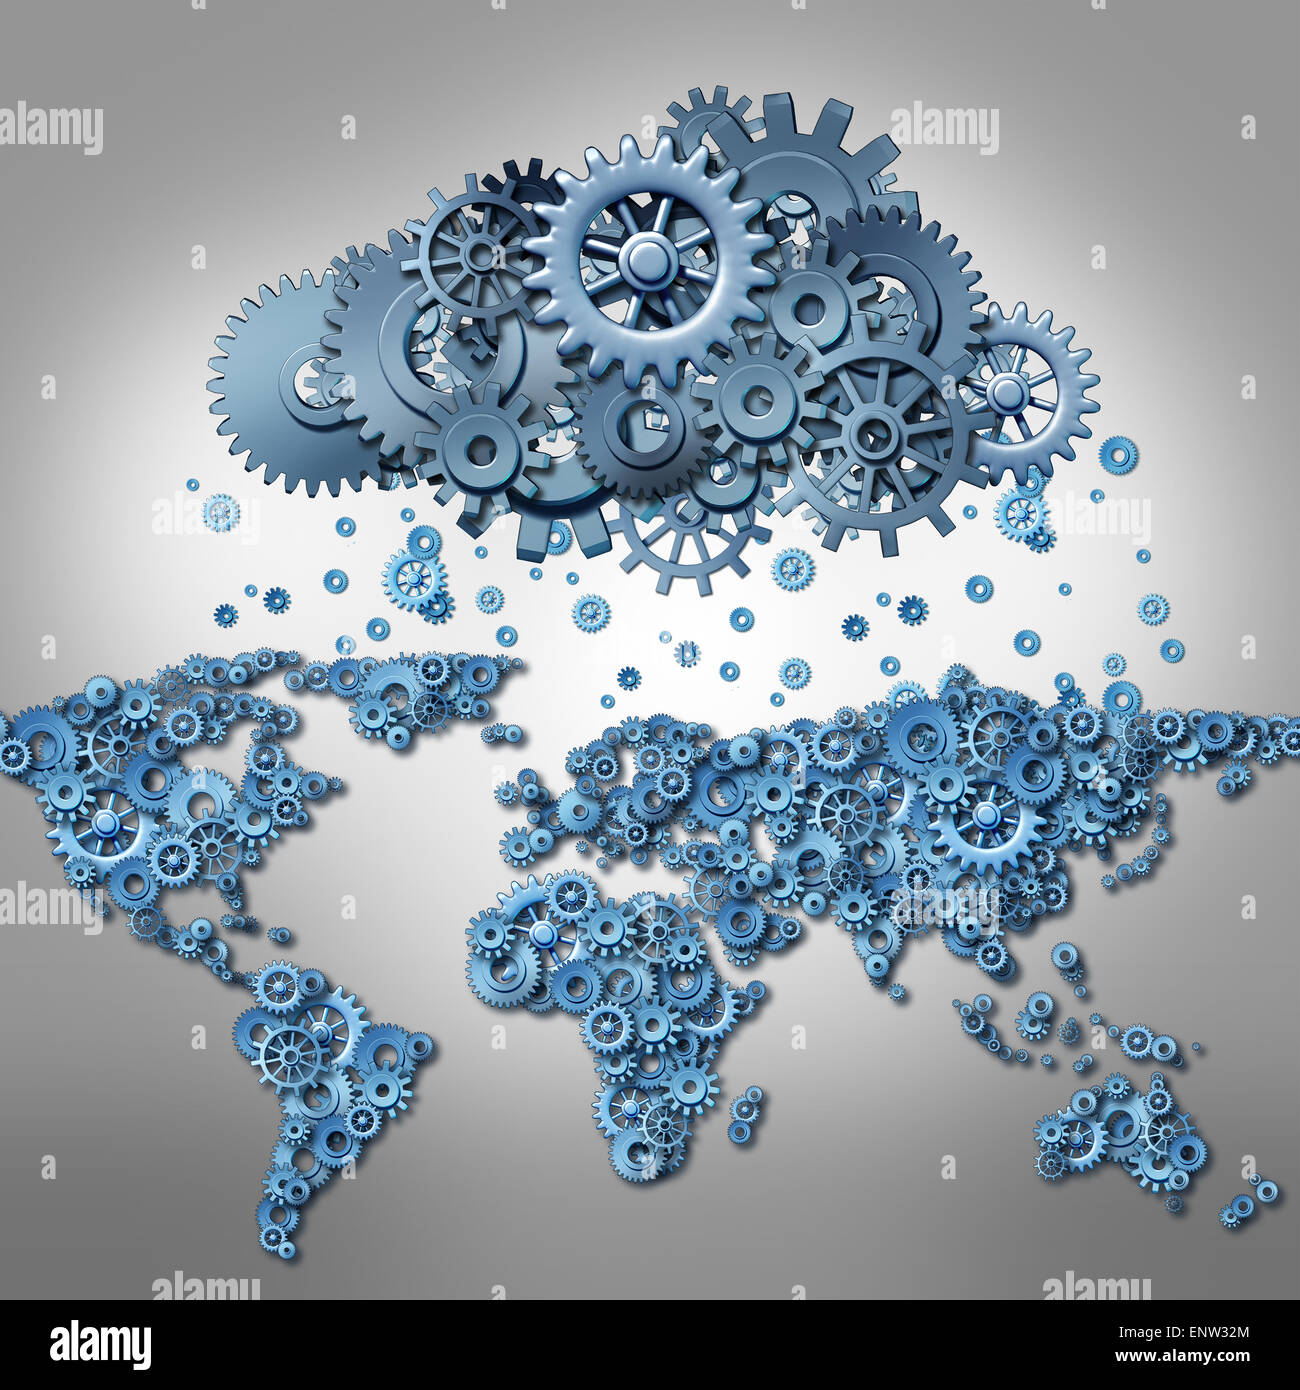 Cloud computing Concept and global internet technology symbol as world map made of machine gears and a group of cog wheels shape Stock Photo